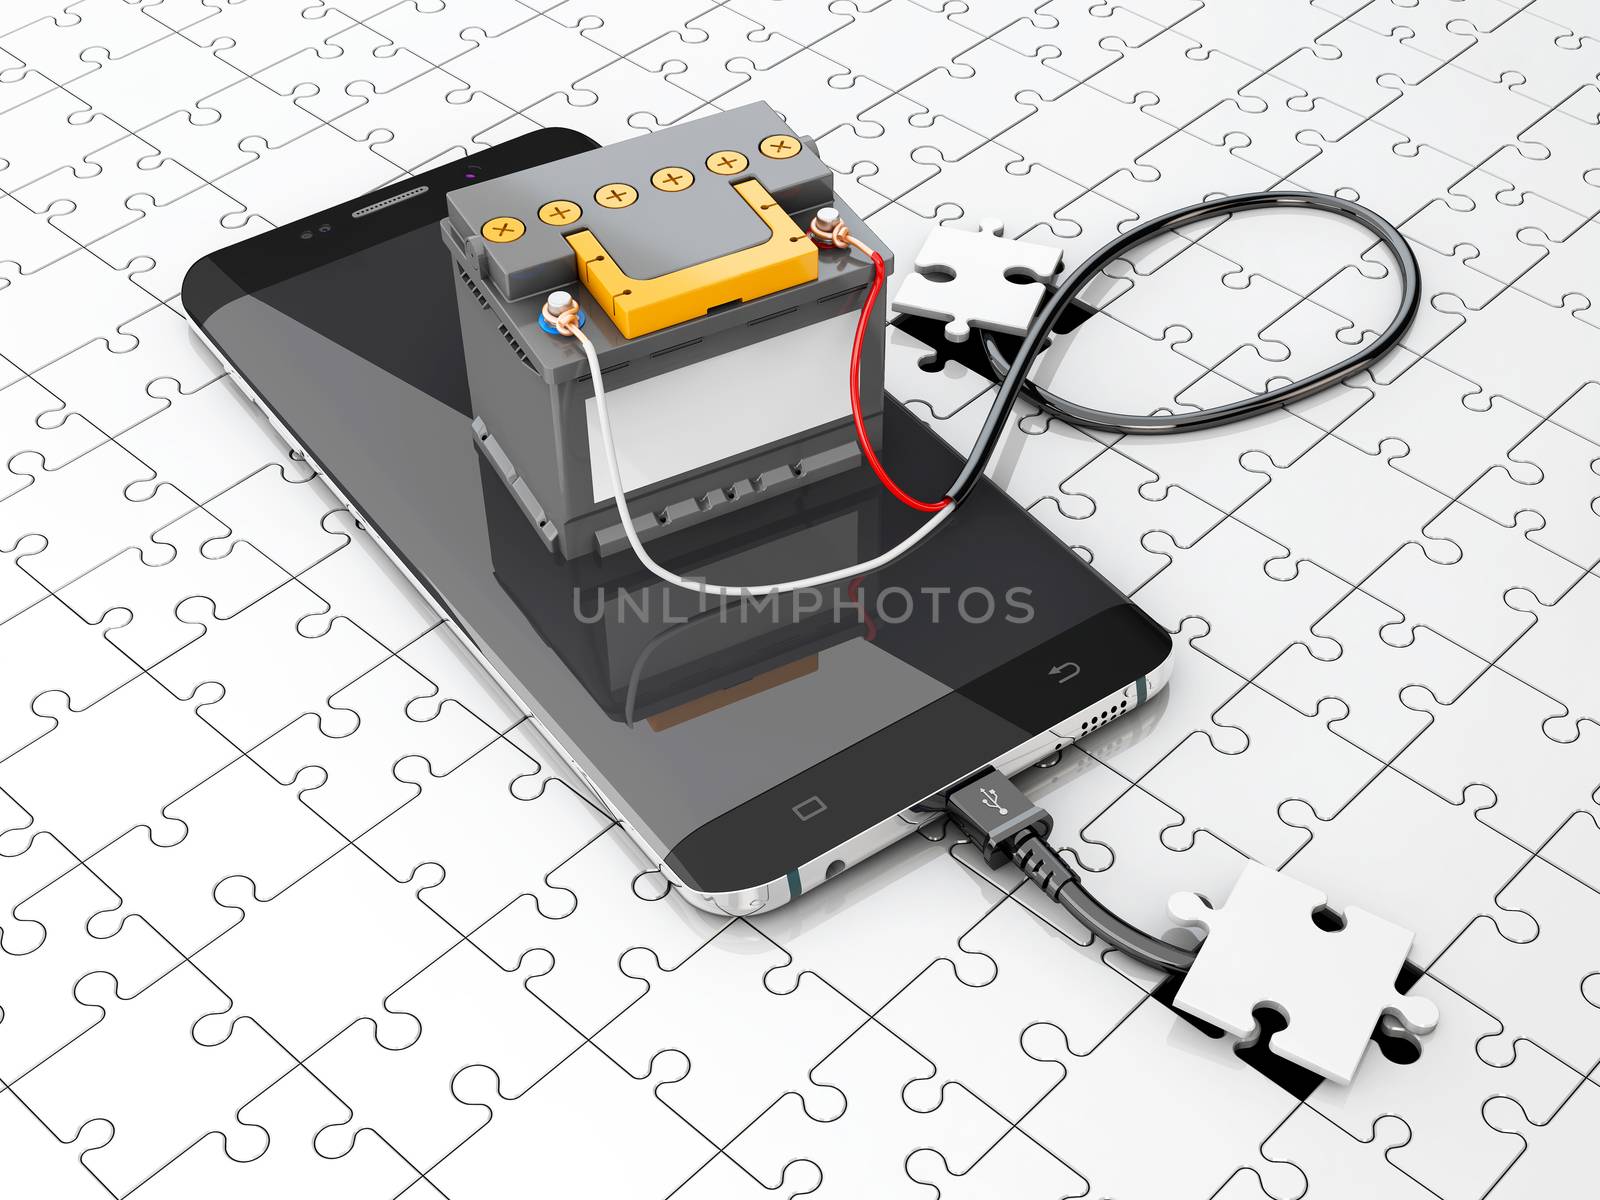 New concept development of smartphone. Mobile charging technology 3d Illustration by tussik